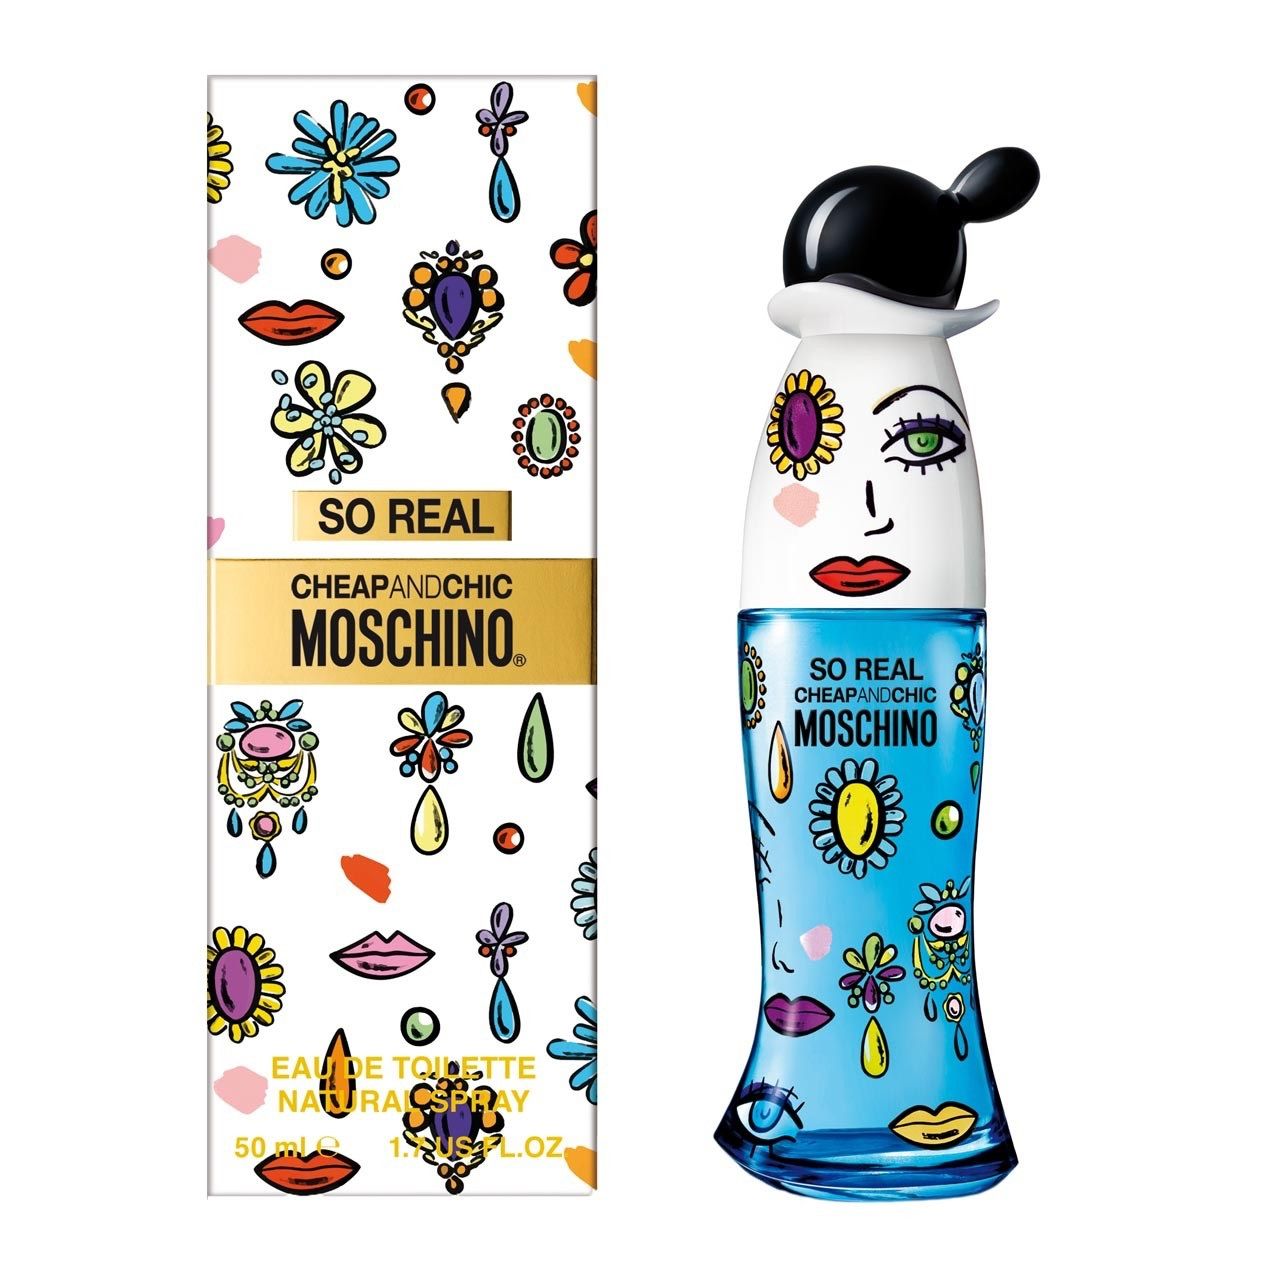 Moschino парфюмерная вода цена. Москино cheap and Chic so real. Moschino cheap and Chic so real Eau de Toilette. Туалетная вода Moschino cheap&Chic. Cheapandchic Moschino духи.